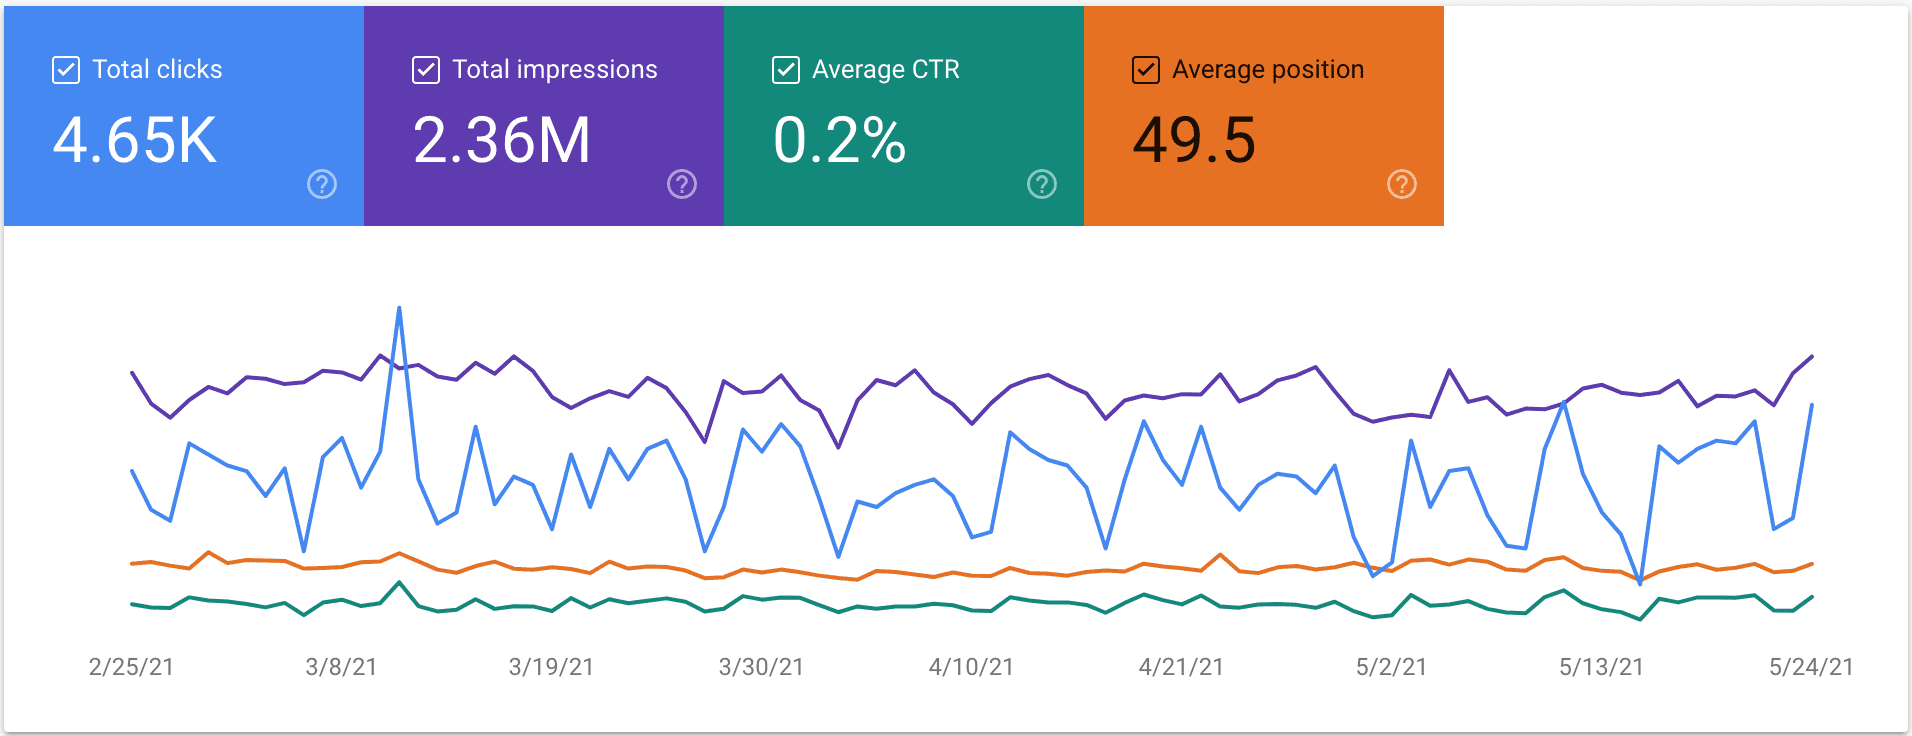 Performance tab line graph with four metrics: clicks, impressions, ctr, and average position